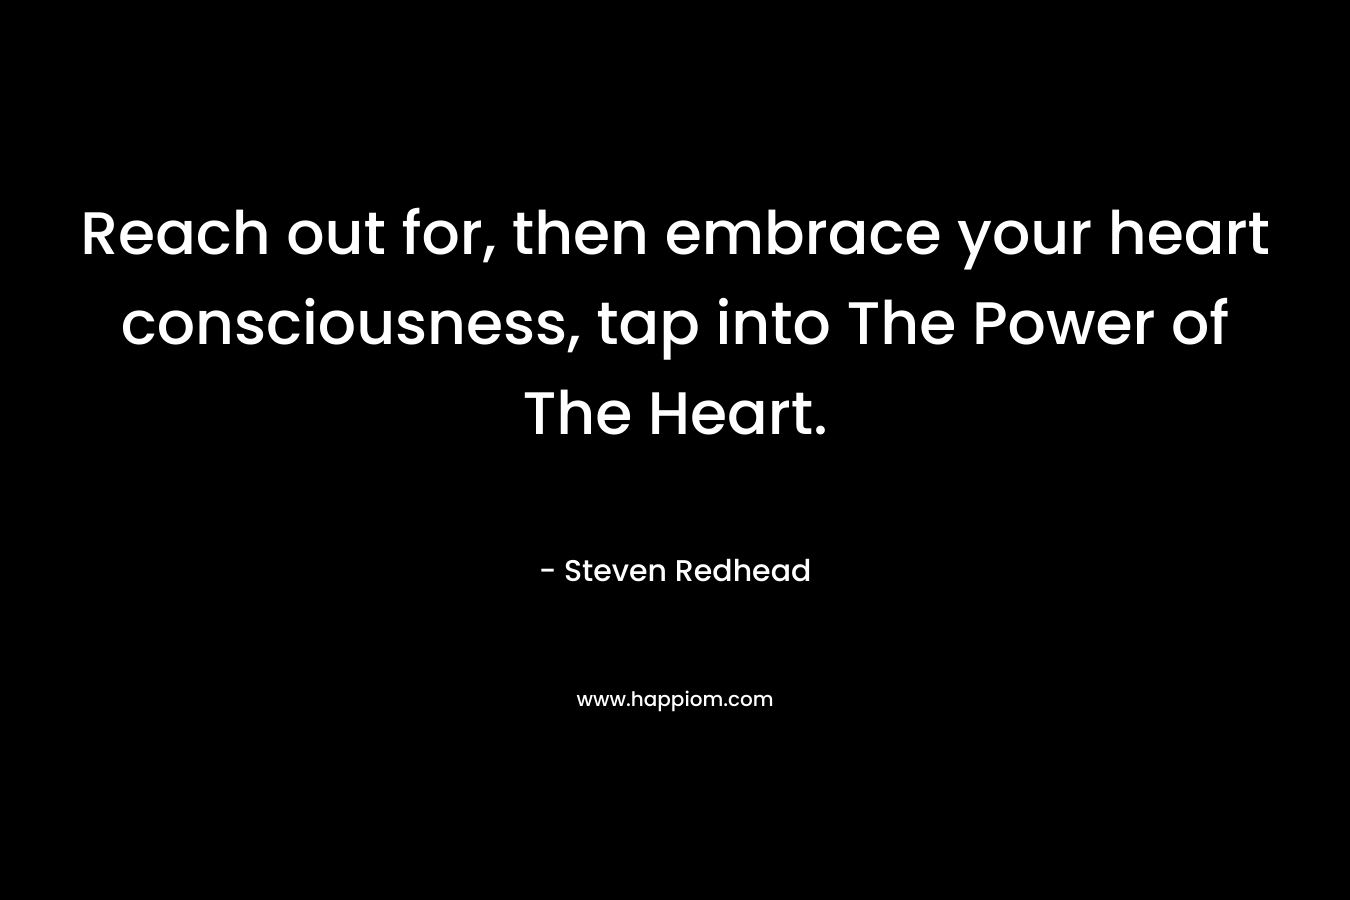 Reach out for, then embrace your heart consciousness, tap into The Power of The Heart. – Steven Redhead